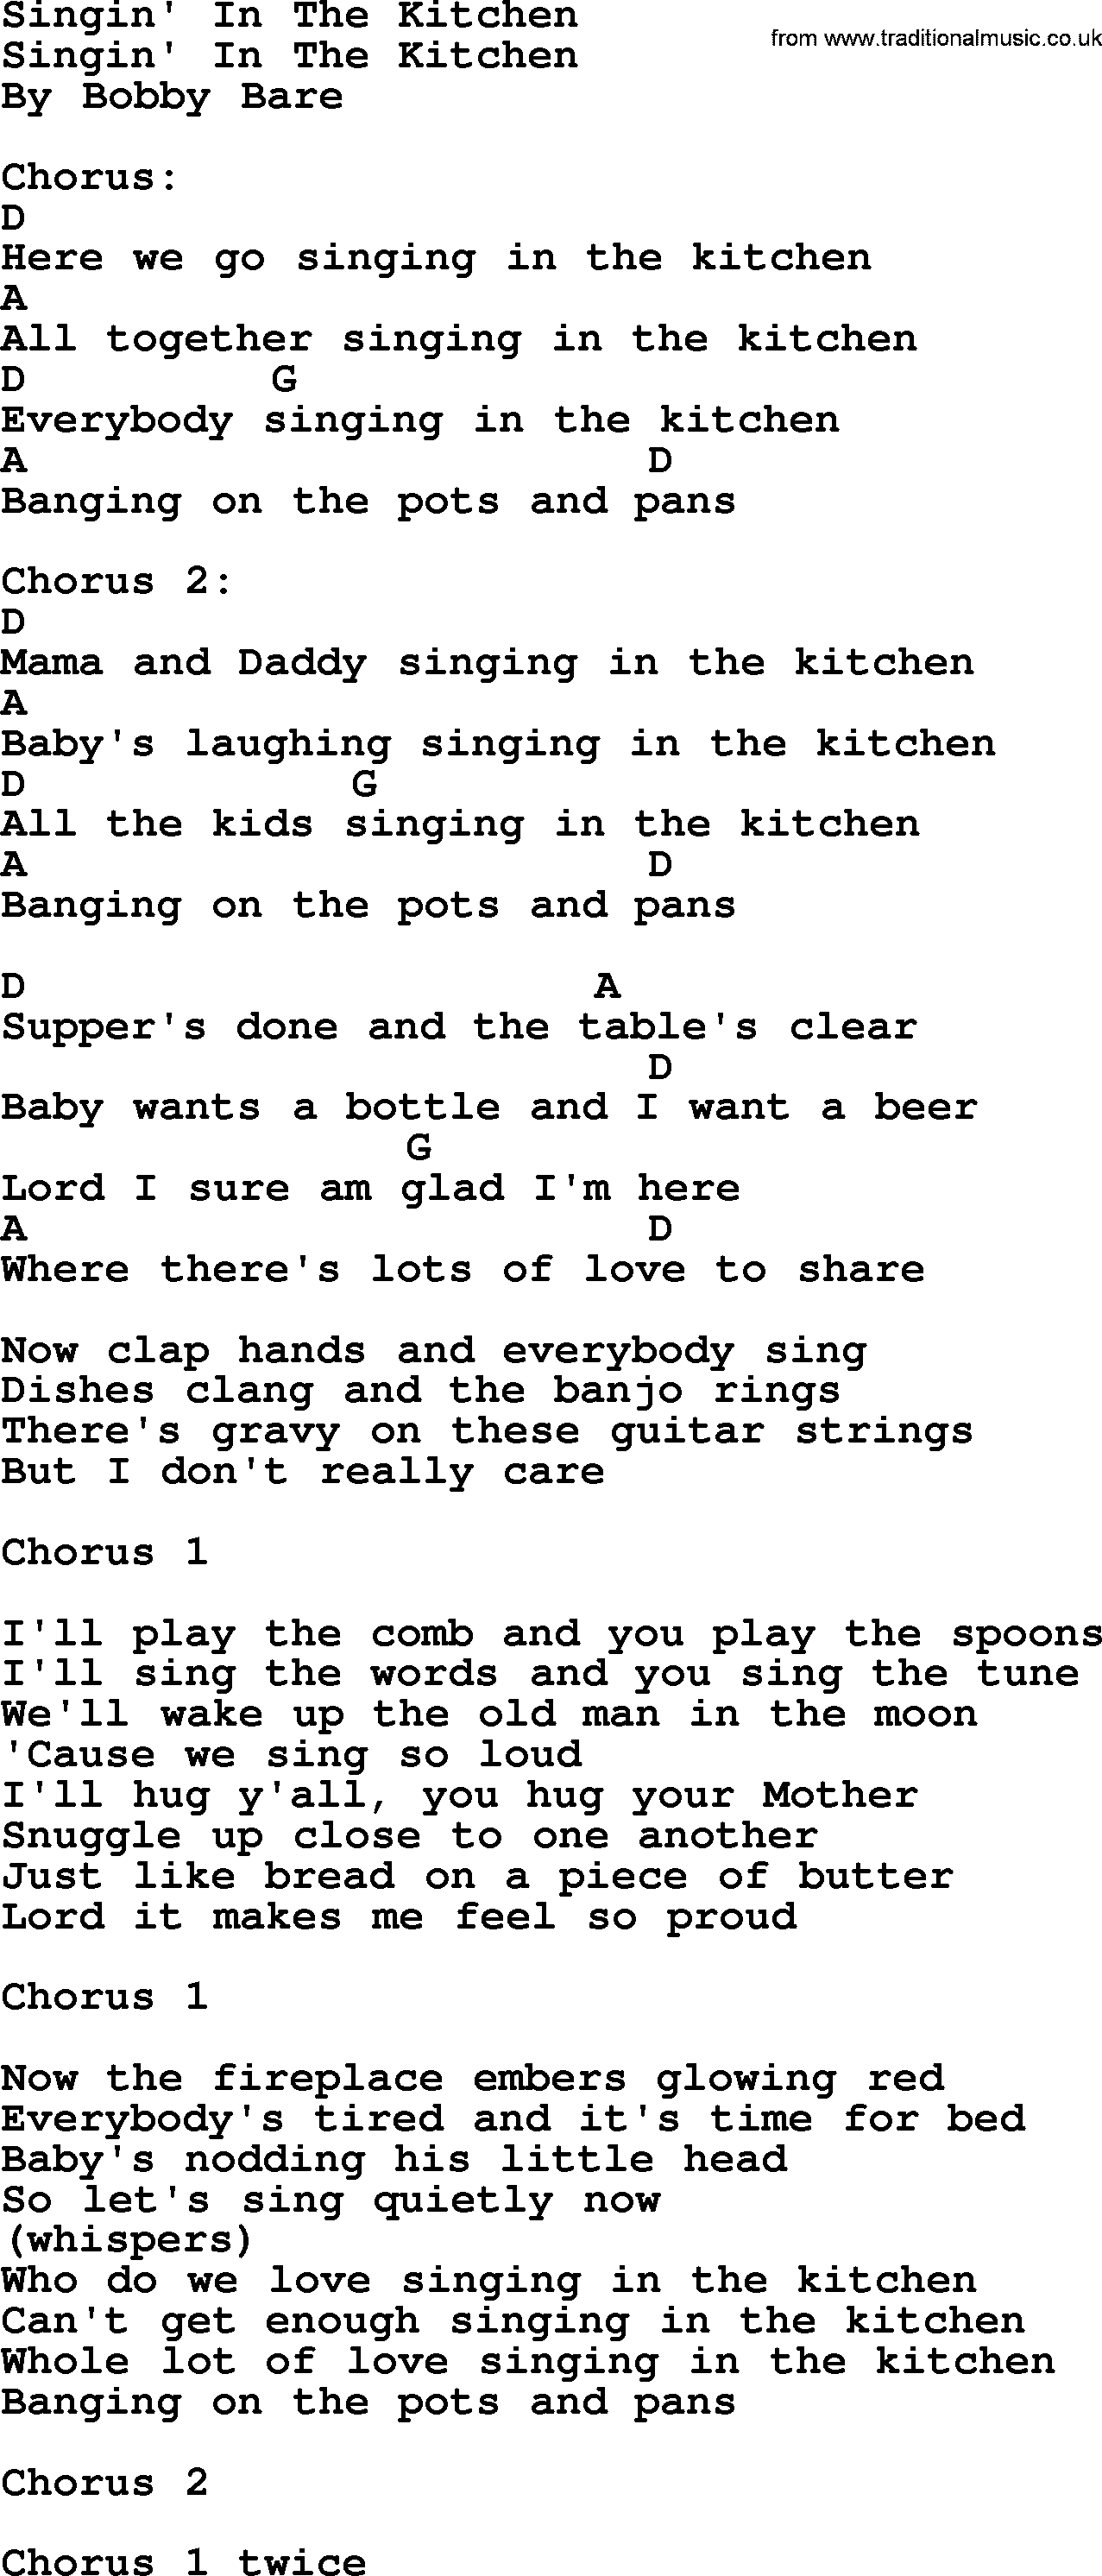 Bluegrass song: Singin' In The Kitchen, lyrics and chords